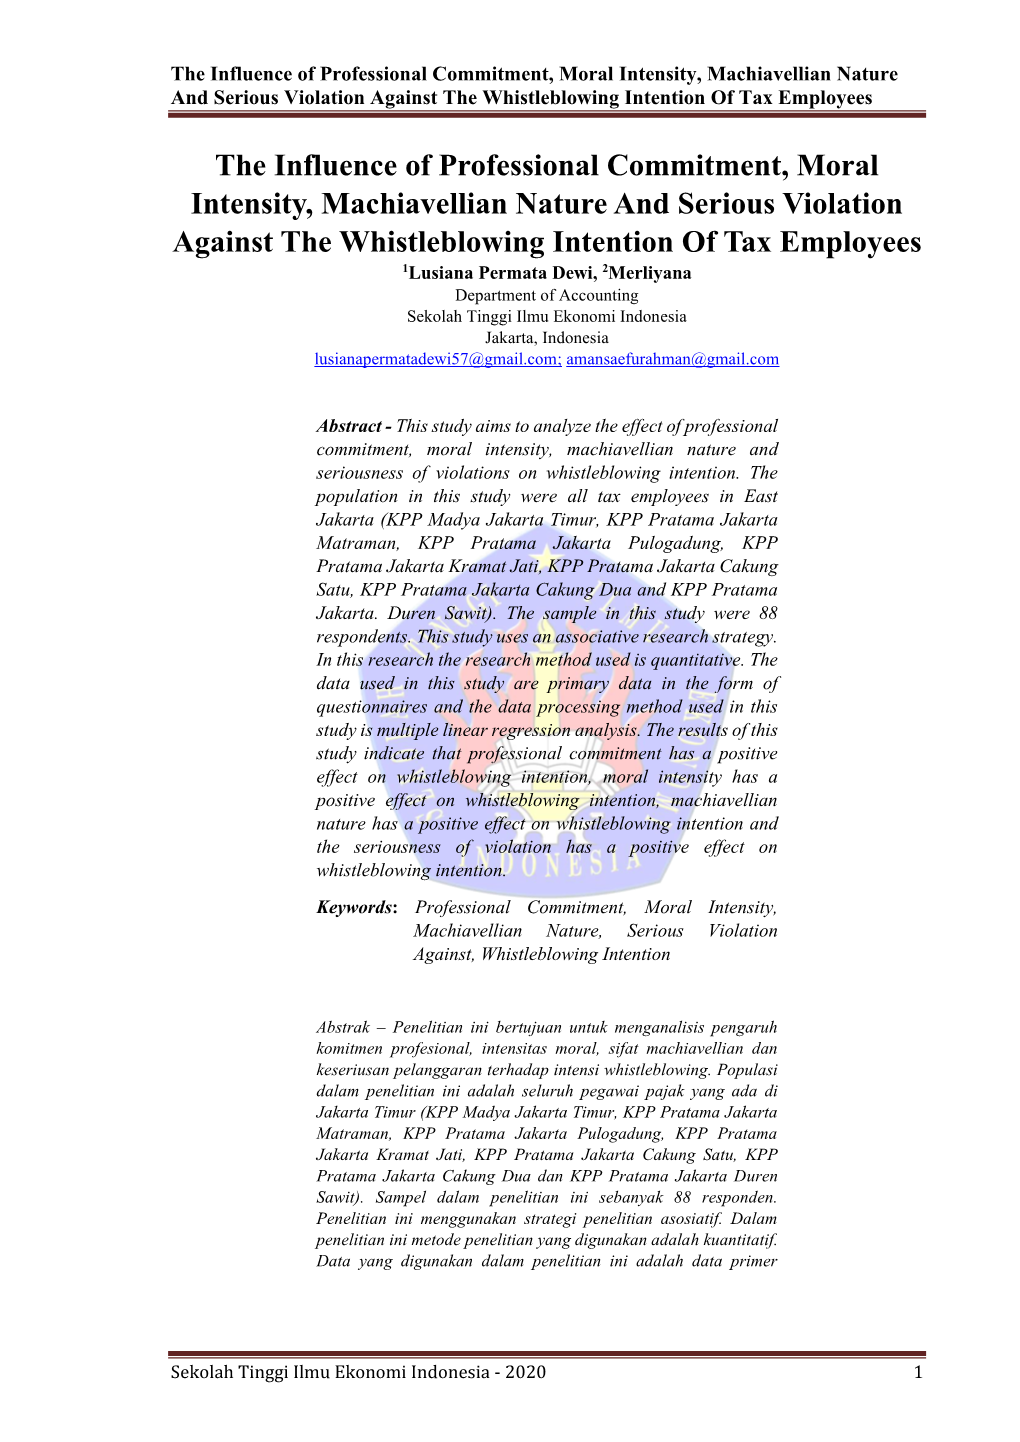 The Influence of Professional Commitment, Moral Intensity, Machiavellian Nature and Serious Violation Against the Whistleblowing Intention of Tax Employees